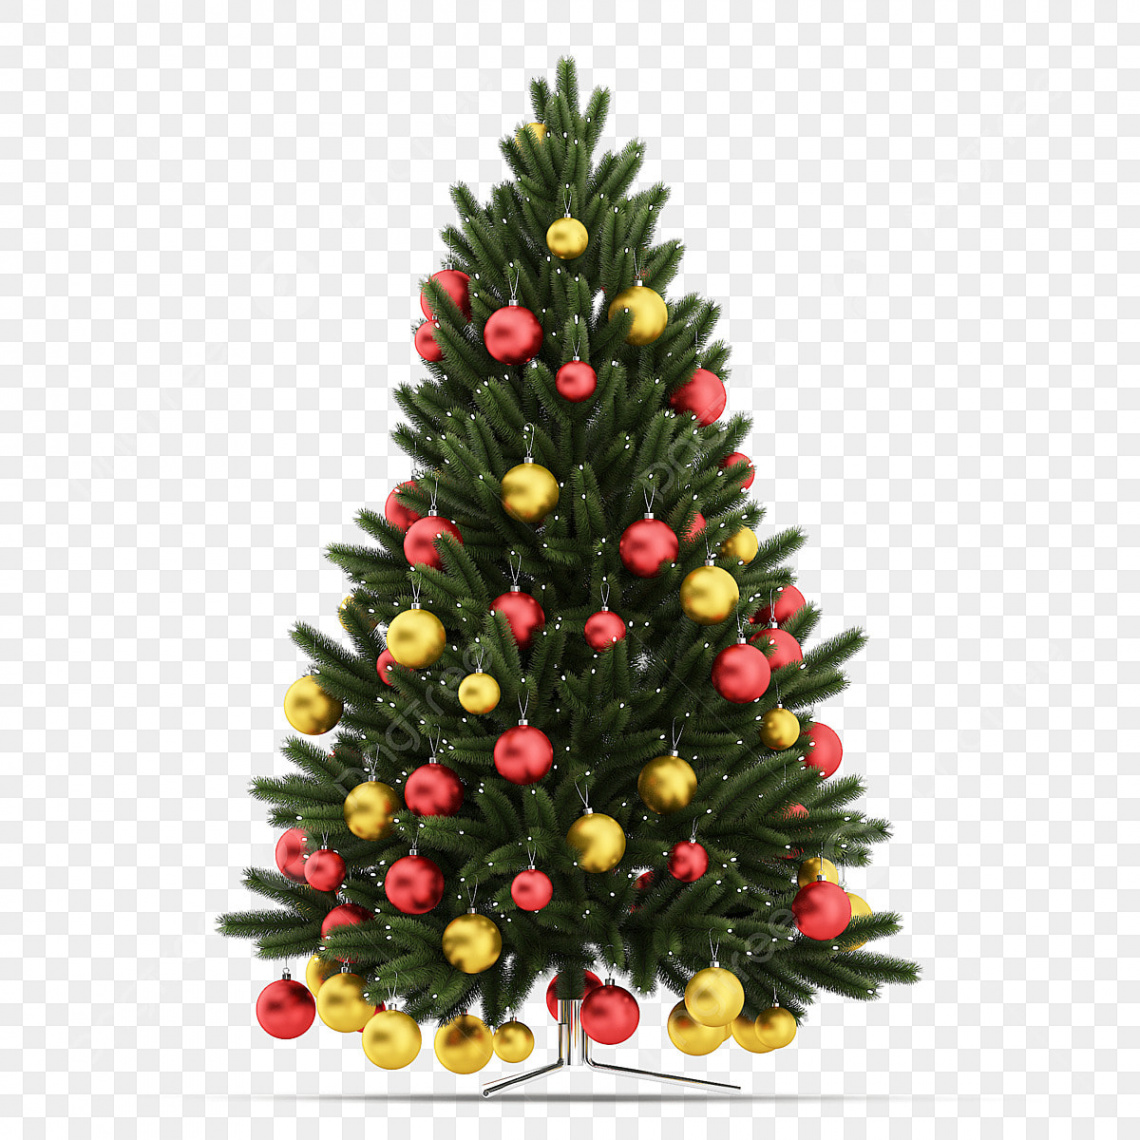 Christmas Tree PNG Images, Download + Christmas Tree PNG